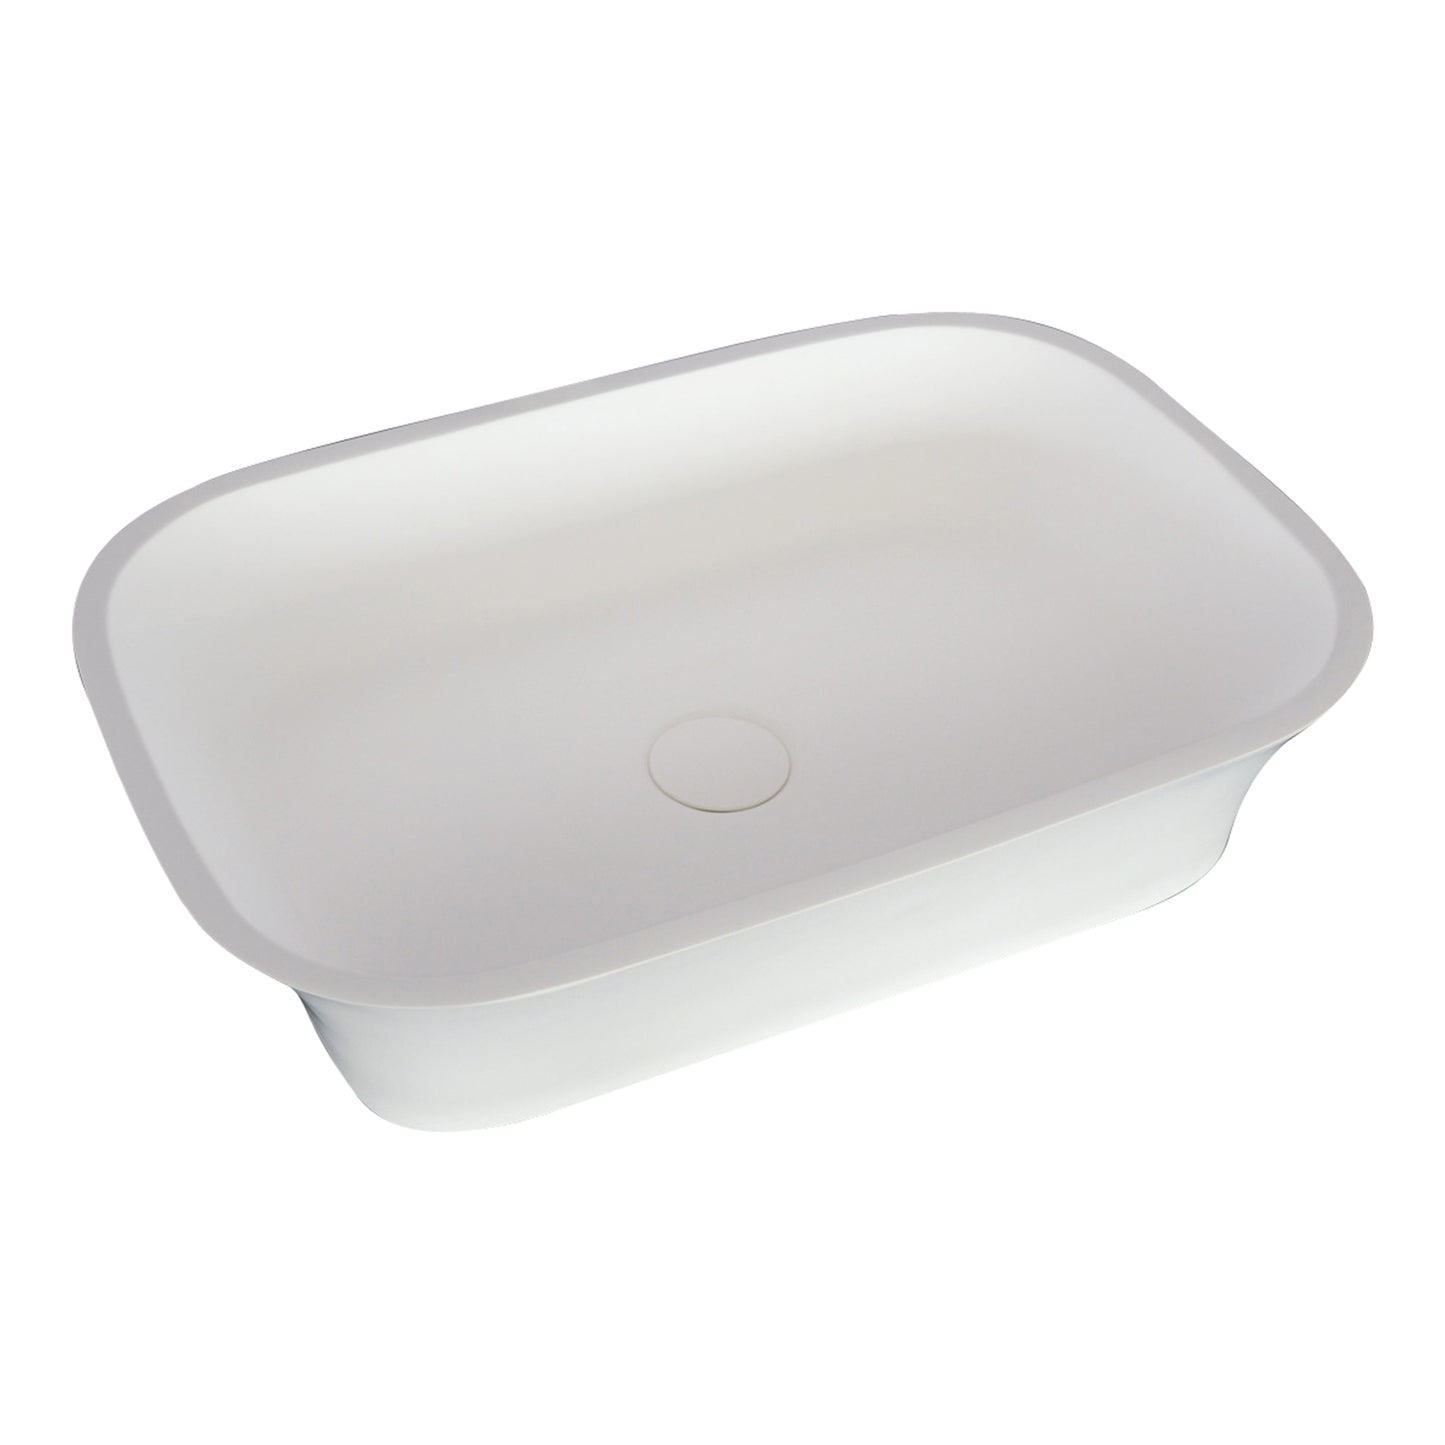 Jeri Resin 22" x 14" Rectangle Vessel Sink with Gloss White Finish